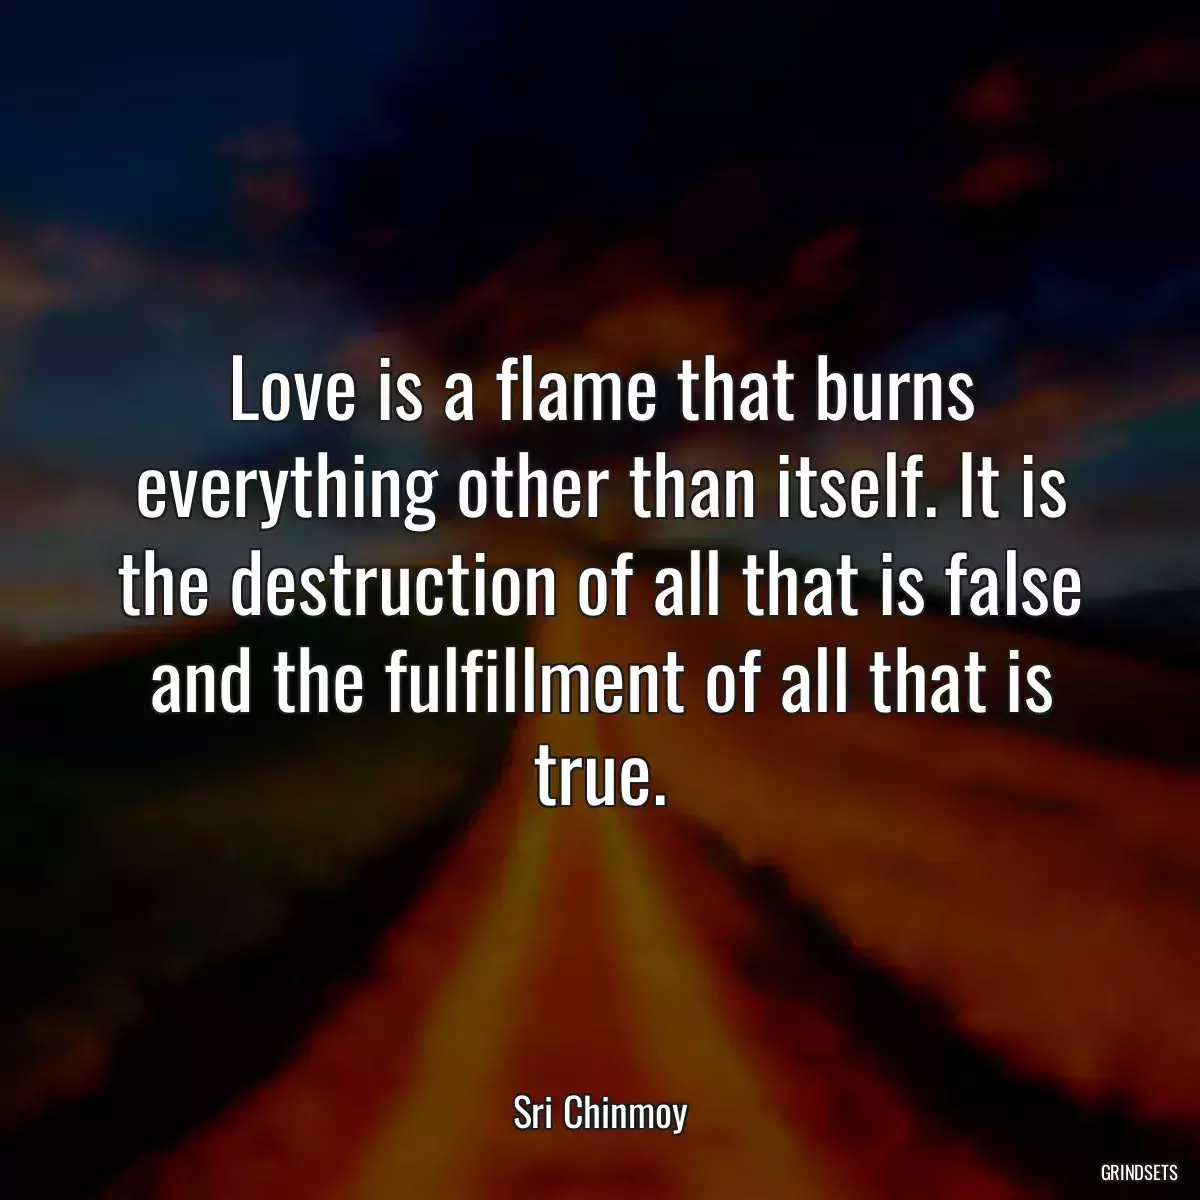 Love is a flame that burns everything other than itself. It is the destruction of all that is false and the fulfillment of all that is true.